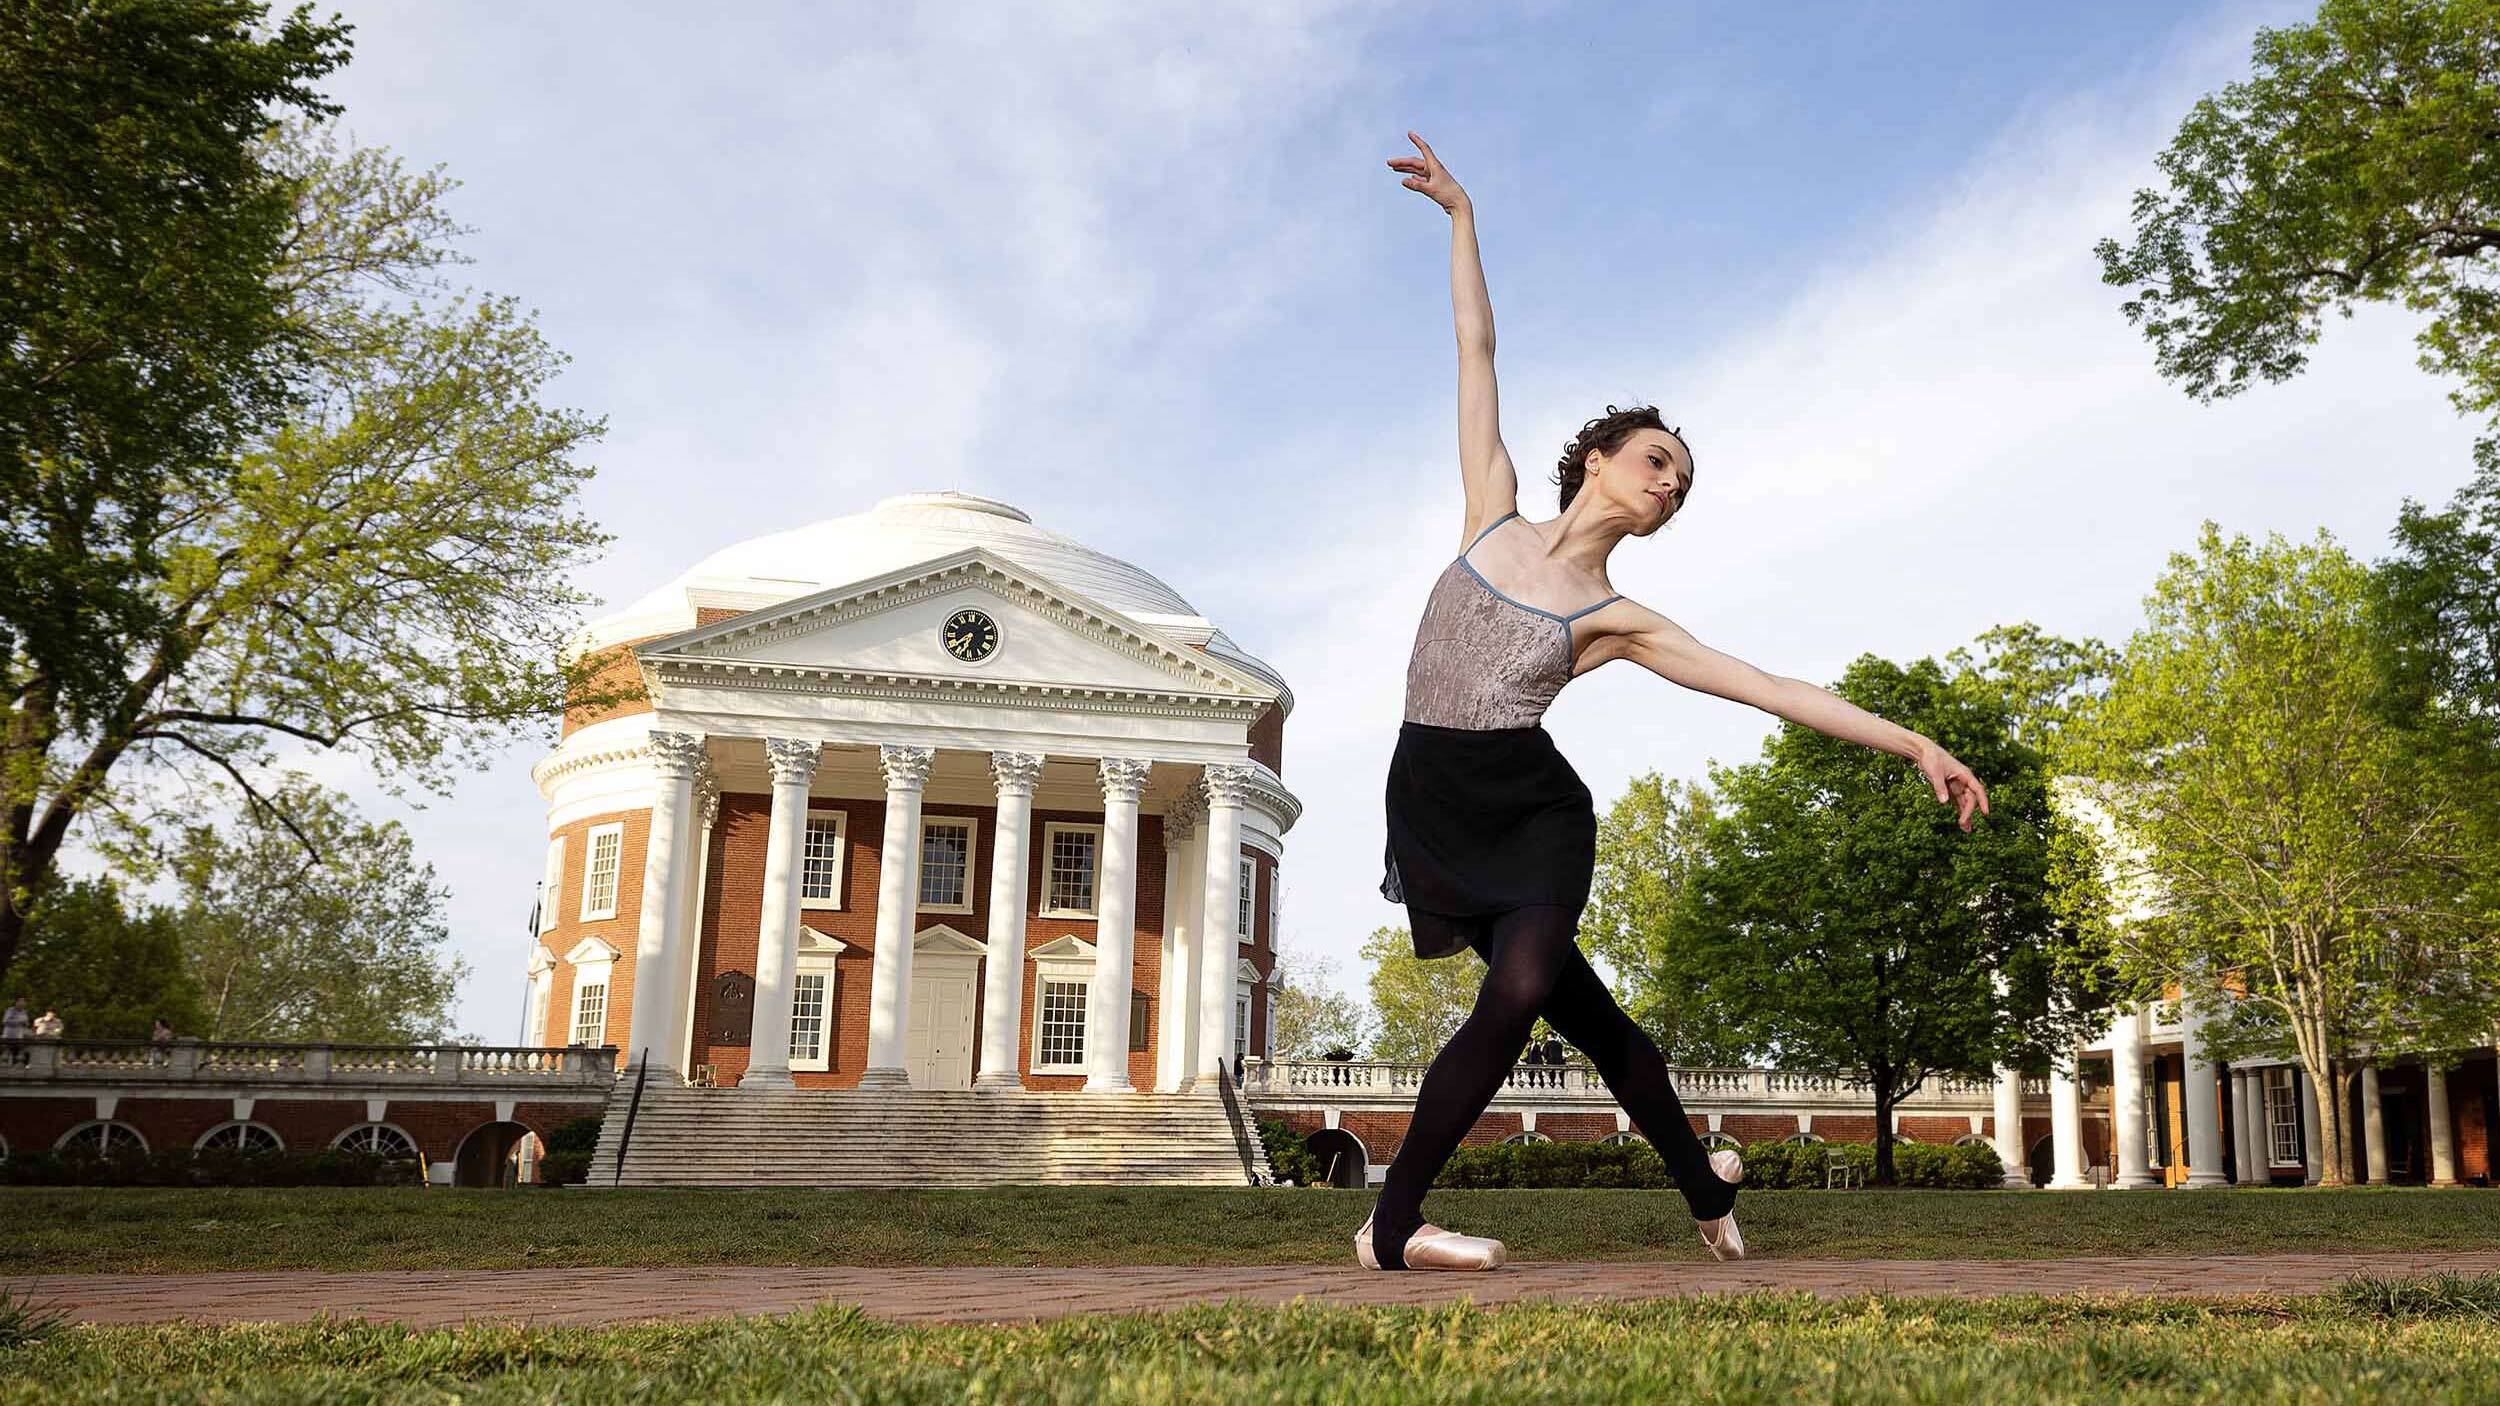 Molly Yeo dances in front of the Rotunda